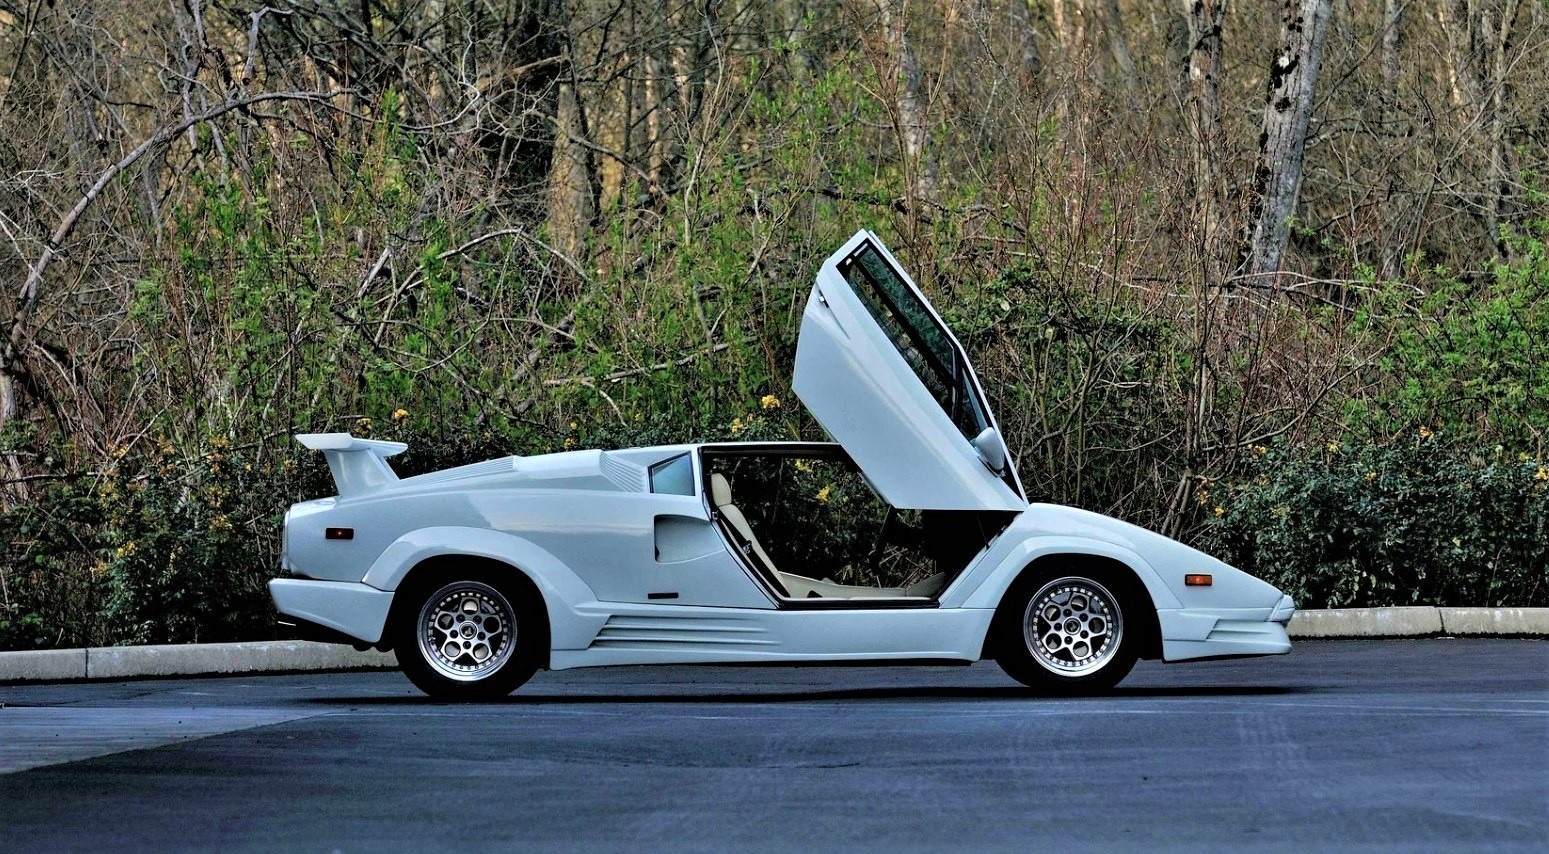 Used 1989 Lamborghini Countach LP112D for sale Sold at The Gables Sports Cars in Miami FL 33146 1